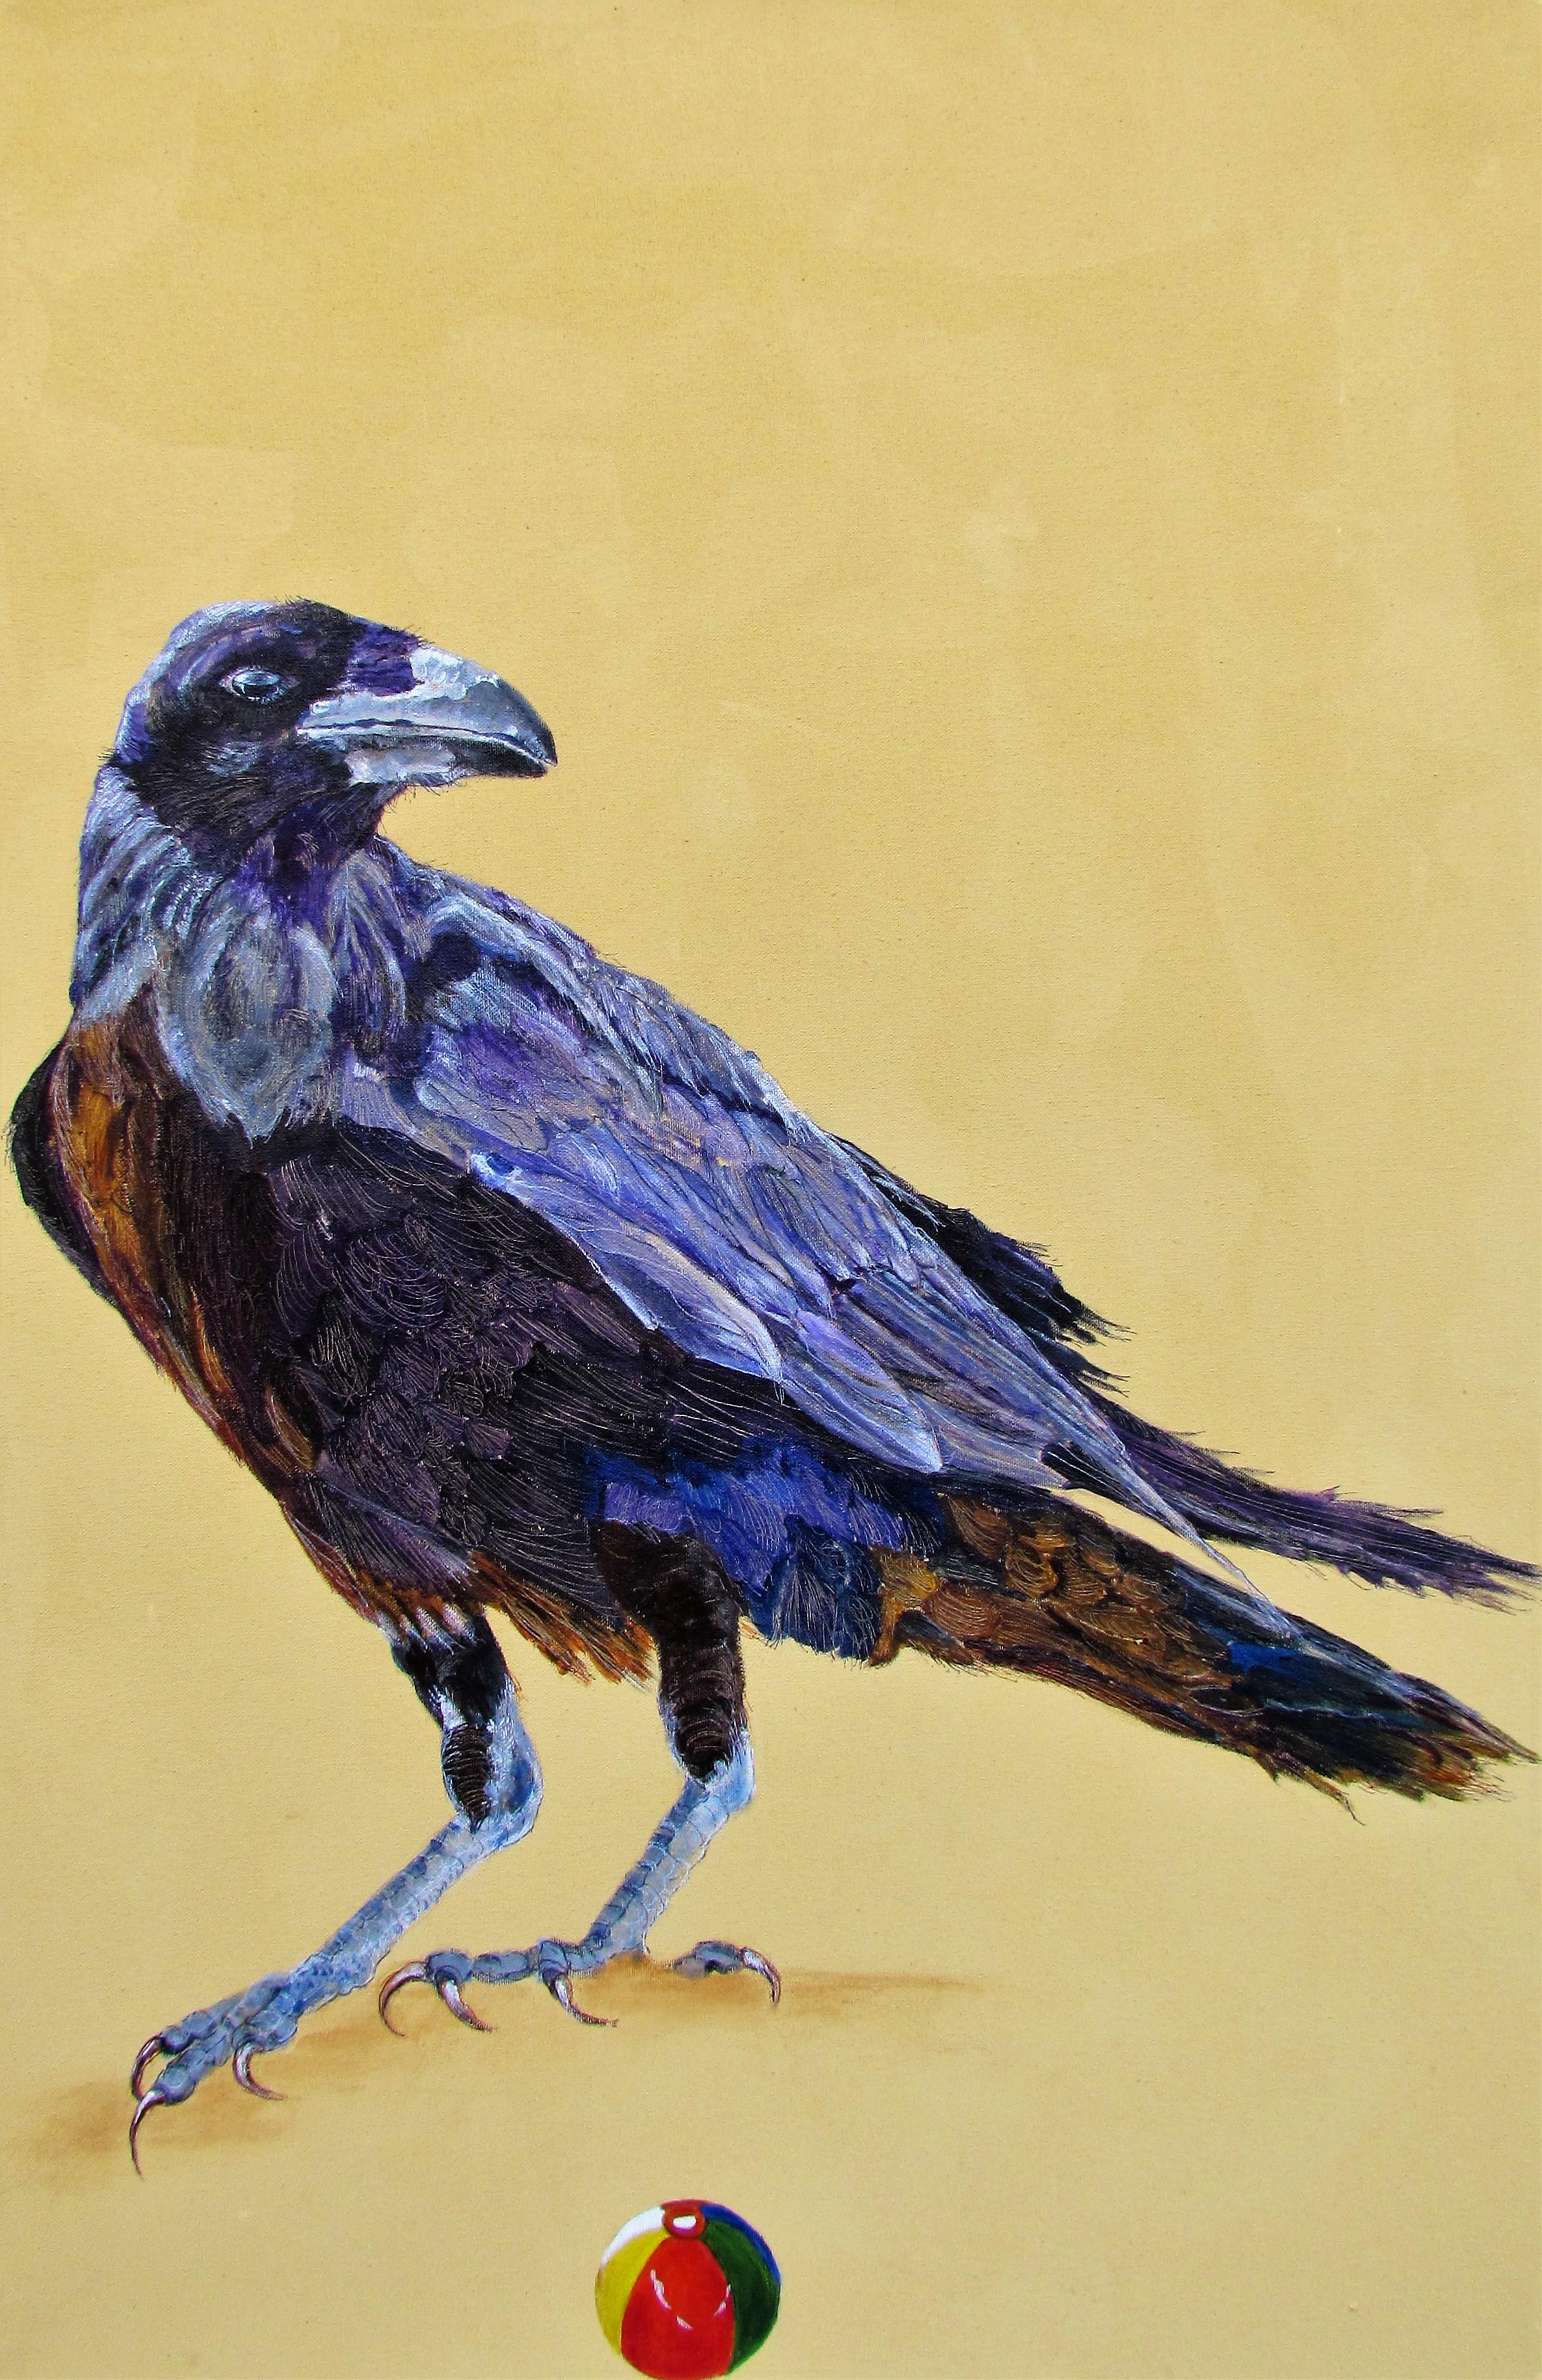 Alison Keenan Animal Painting - Avian Fables: Raven and Beach Ball 2 - acrylic and ink on canvas